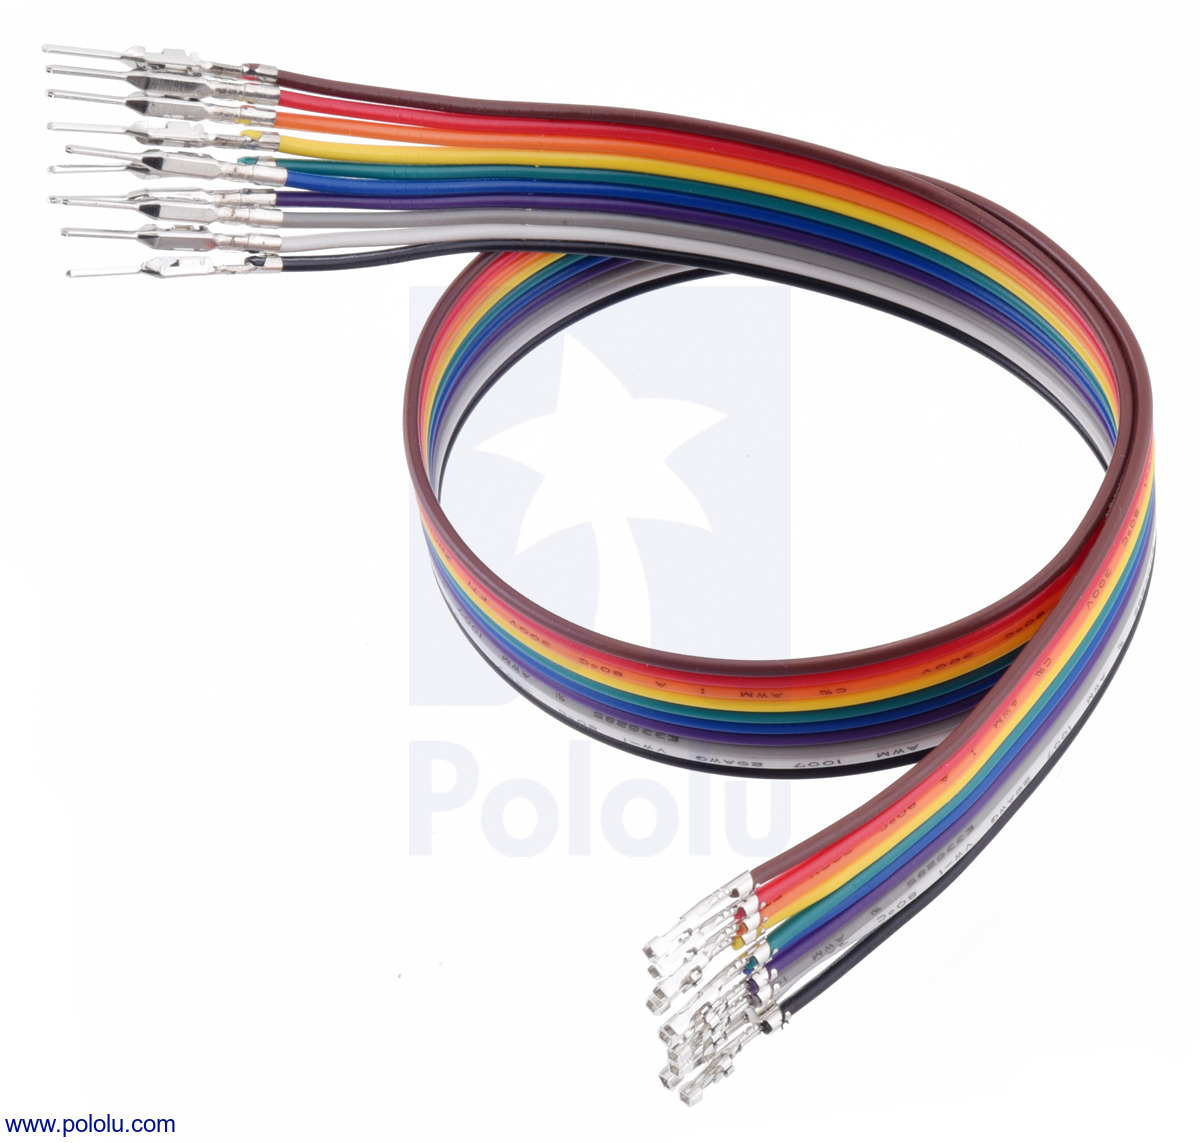 Dupont Wires, Female-Male, 40-pin Flat Cable, 10 cm